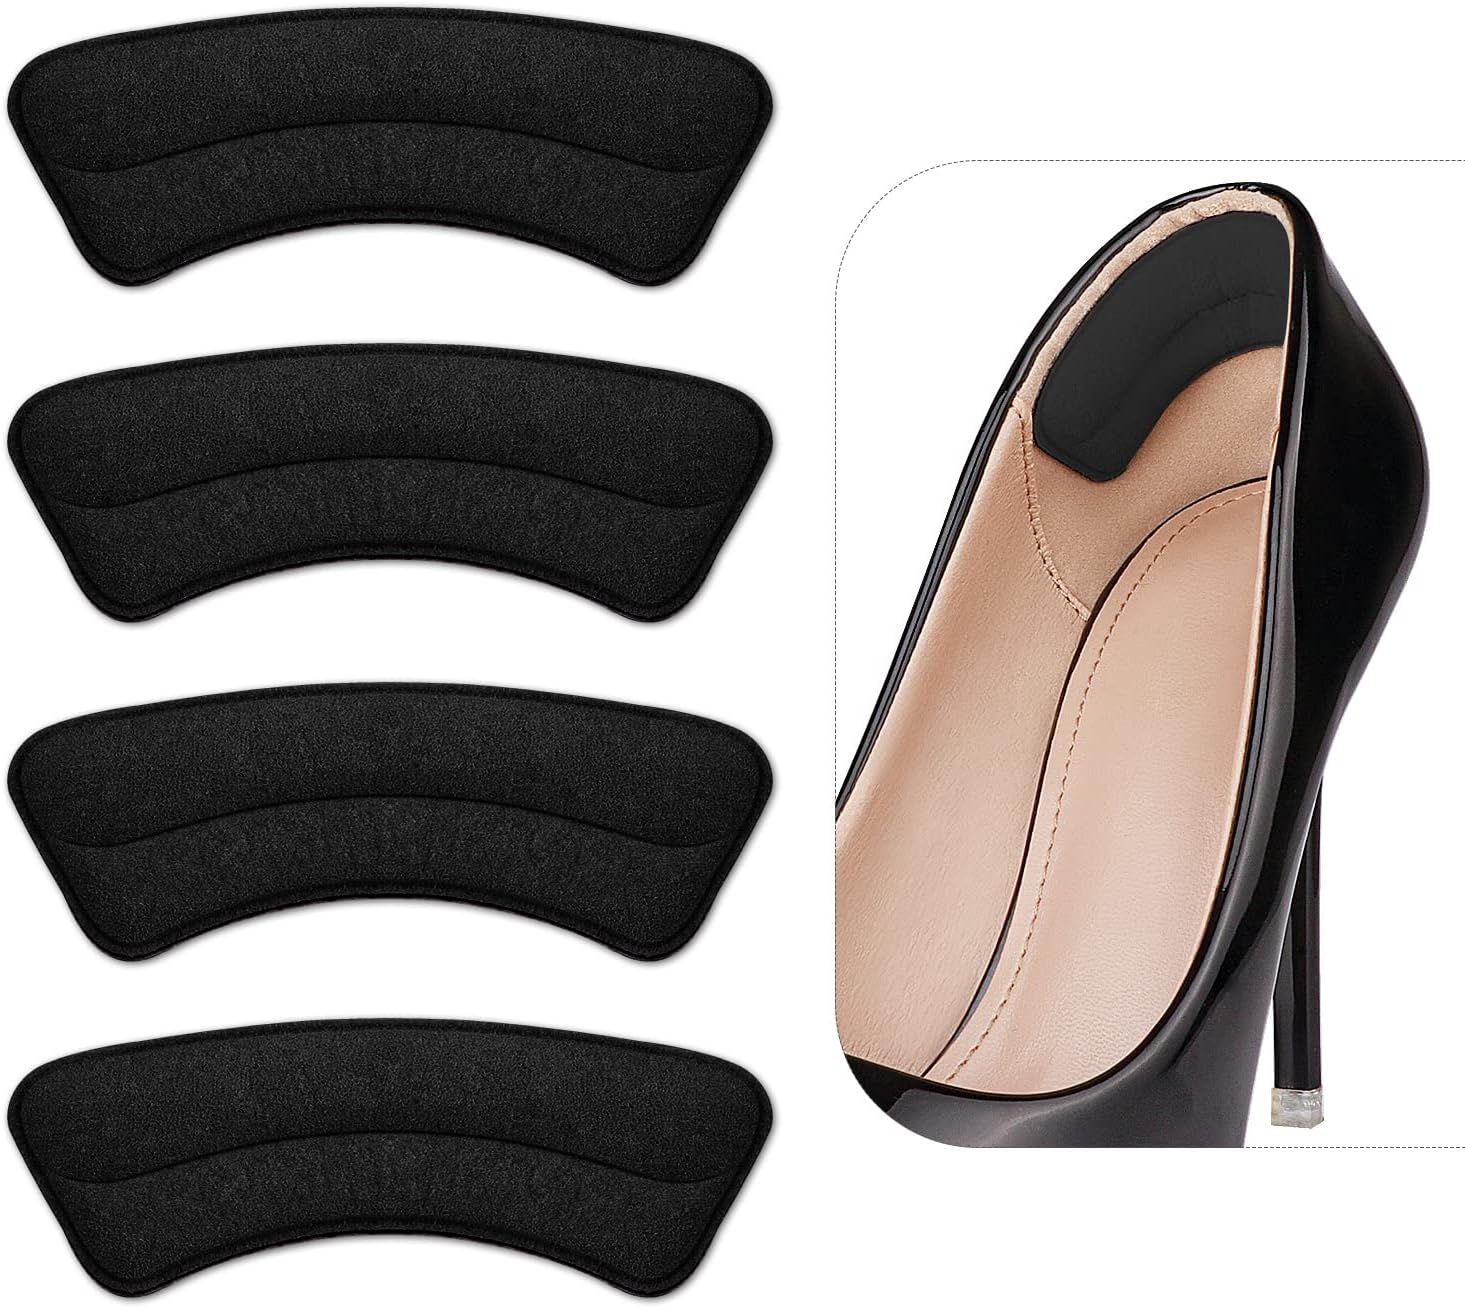 Heel Grips Liner Cushions Inserts for Loose Shoes, Heel Pads Snugs for Shoe Too Big Men Women, Filler Improved Shoe Fit and Comfort, Prevent Heel Slip and Blister (4 Pairs) (Pale Apricot)